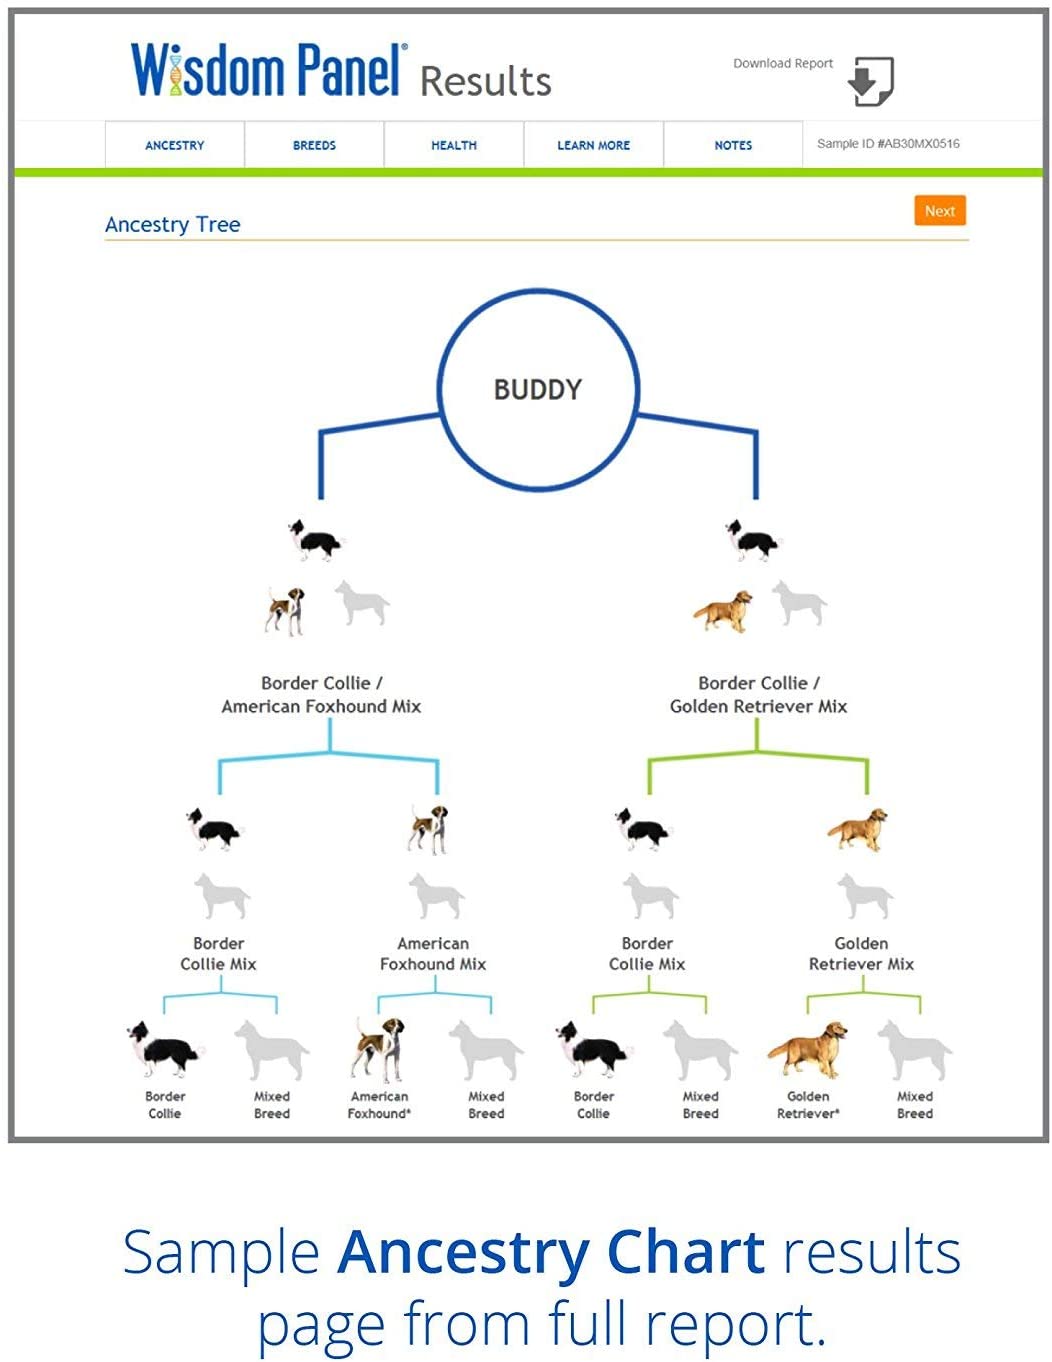 DNA Test Kits For Dogs - Buying Guide - Mars Wisdom Panel
